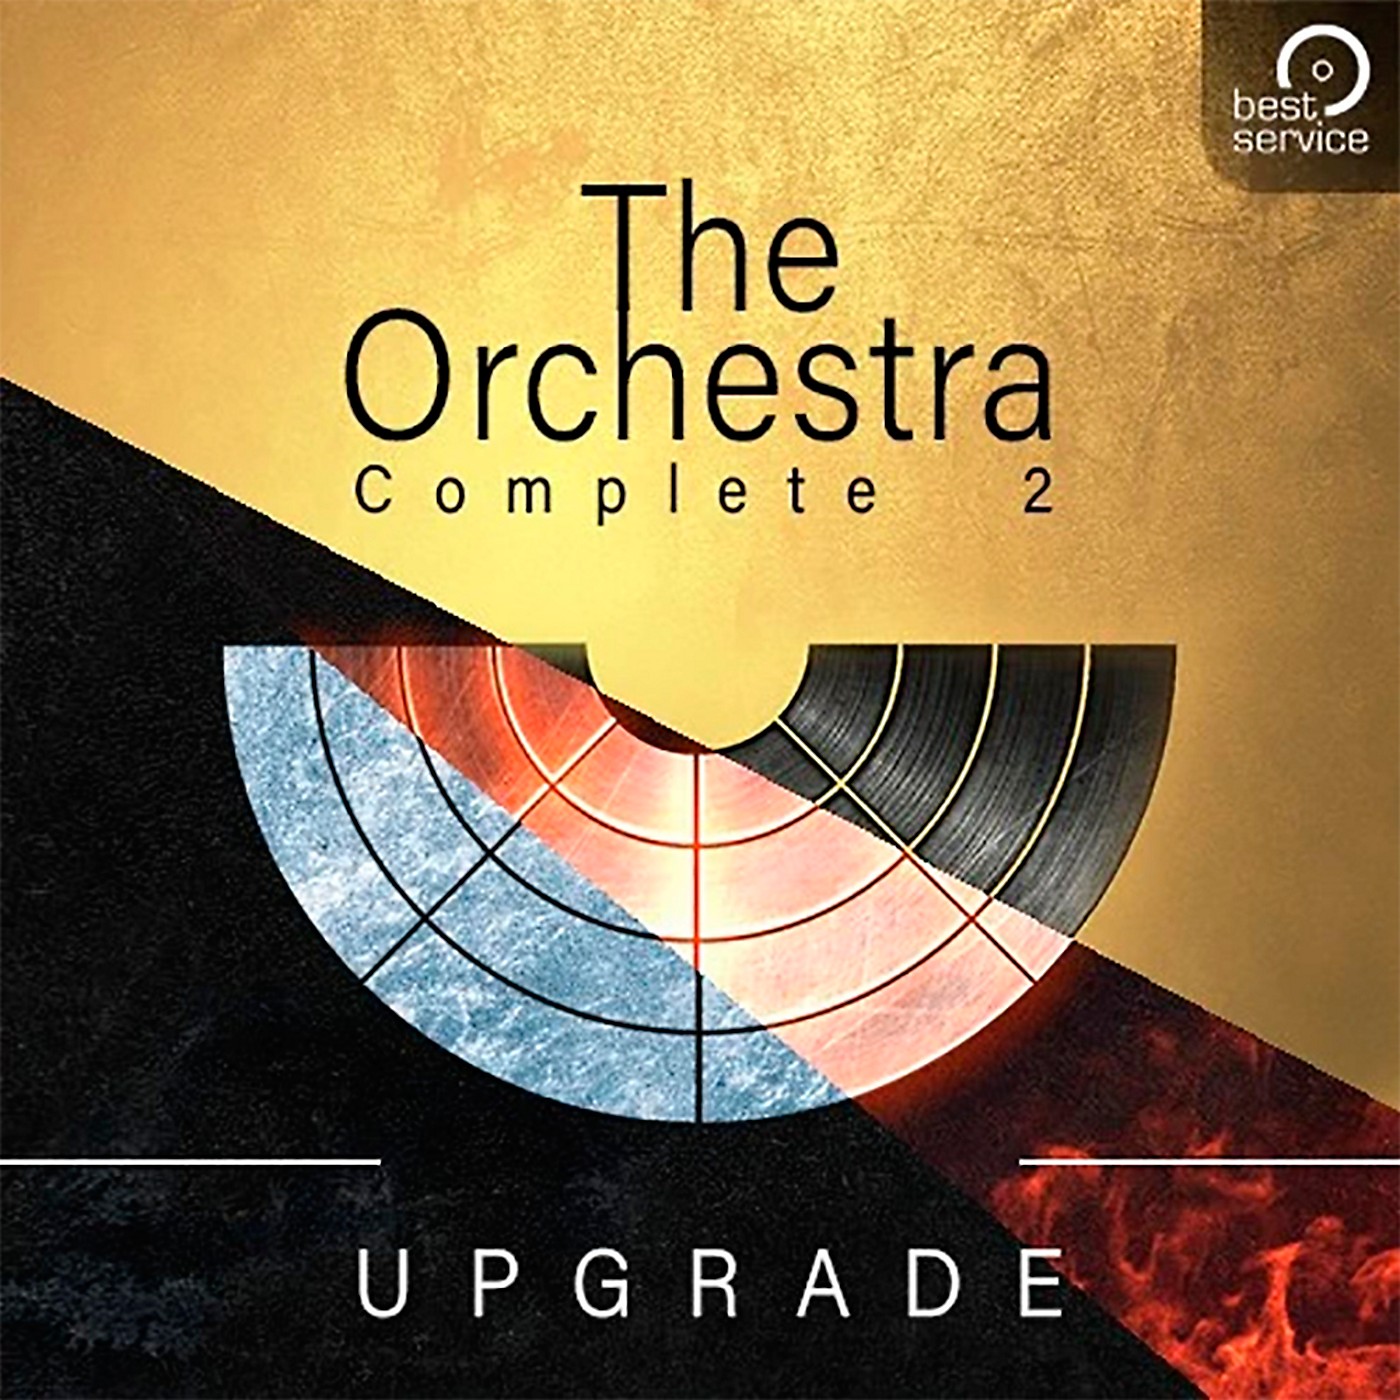 Best Service The Orchestra Complete 2 - Upgrade from The Orchestra Complete 1 thumbnail